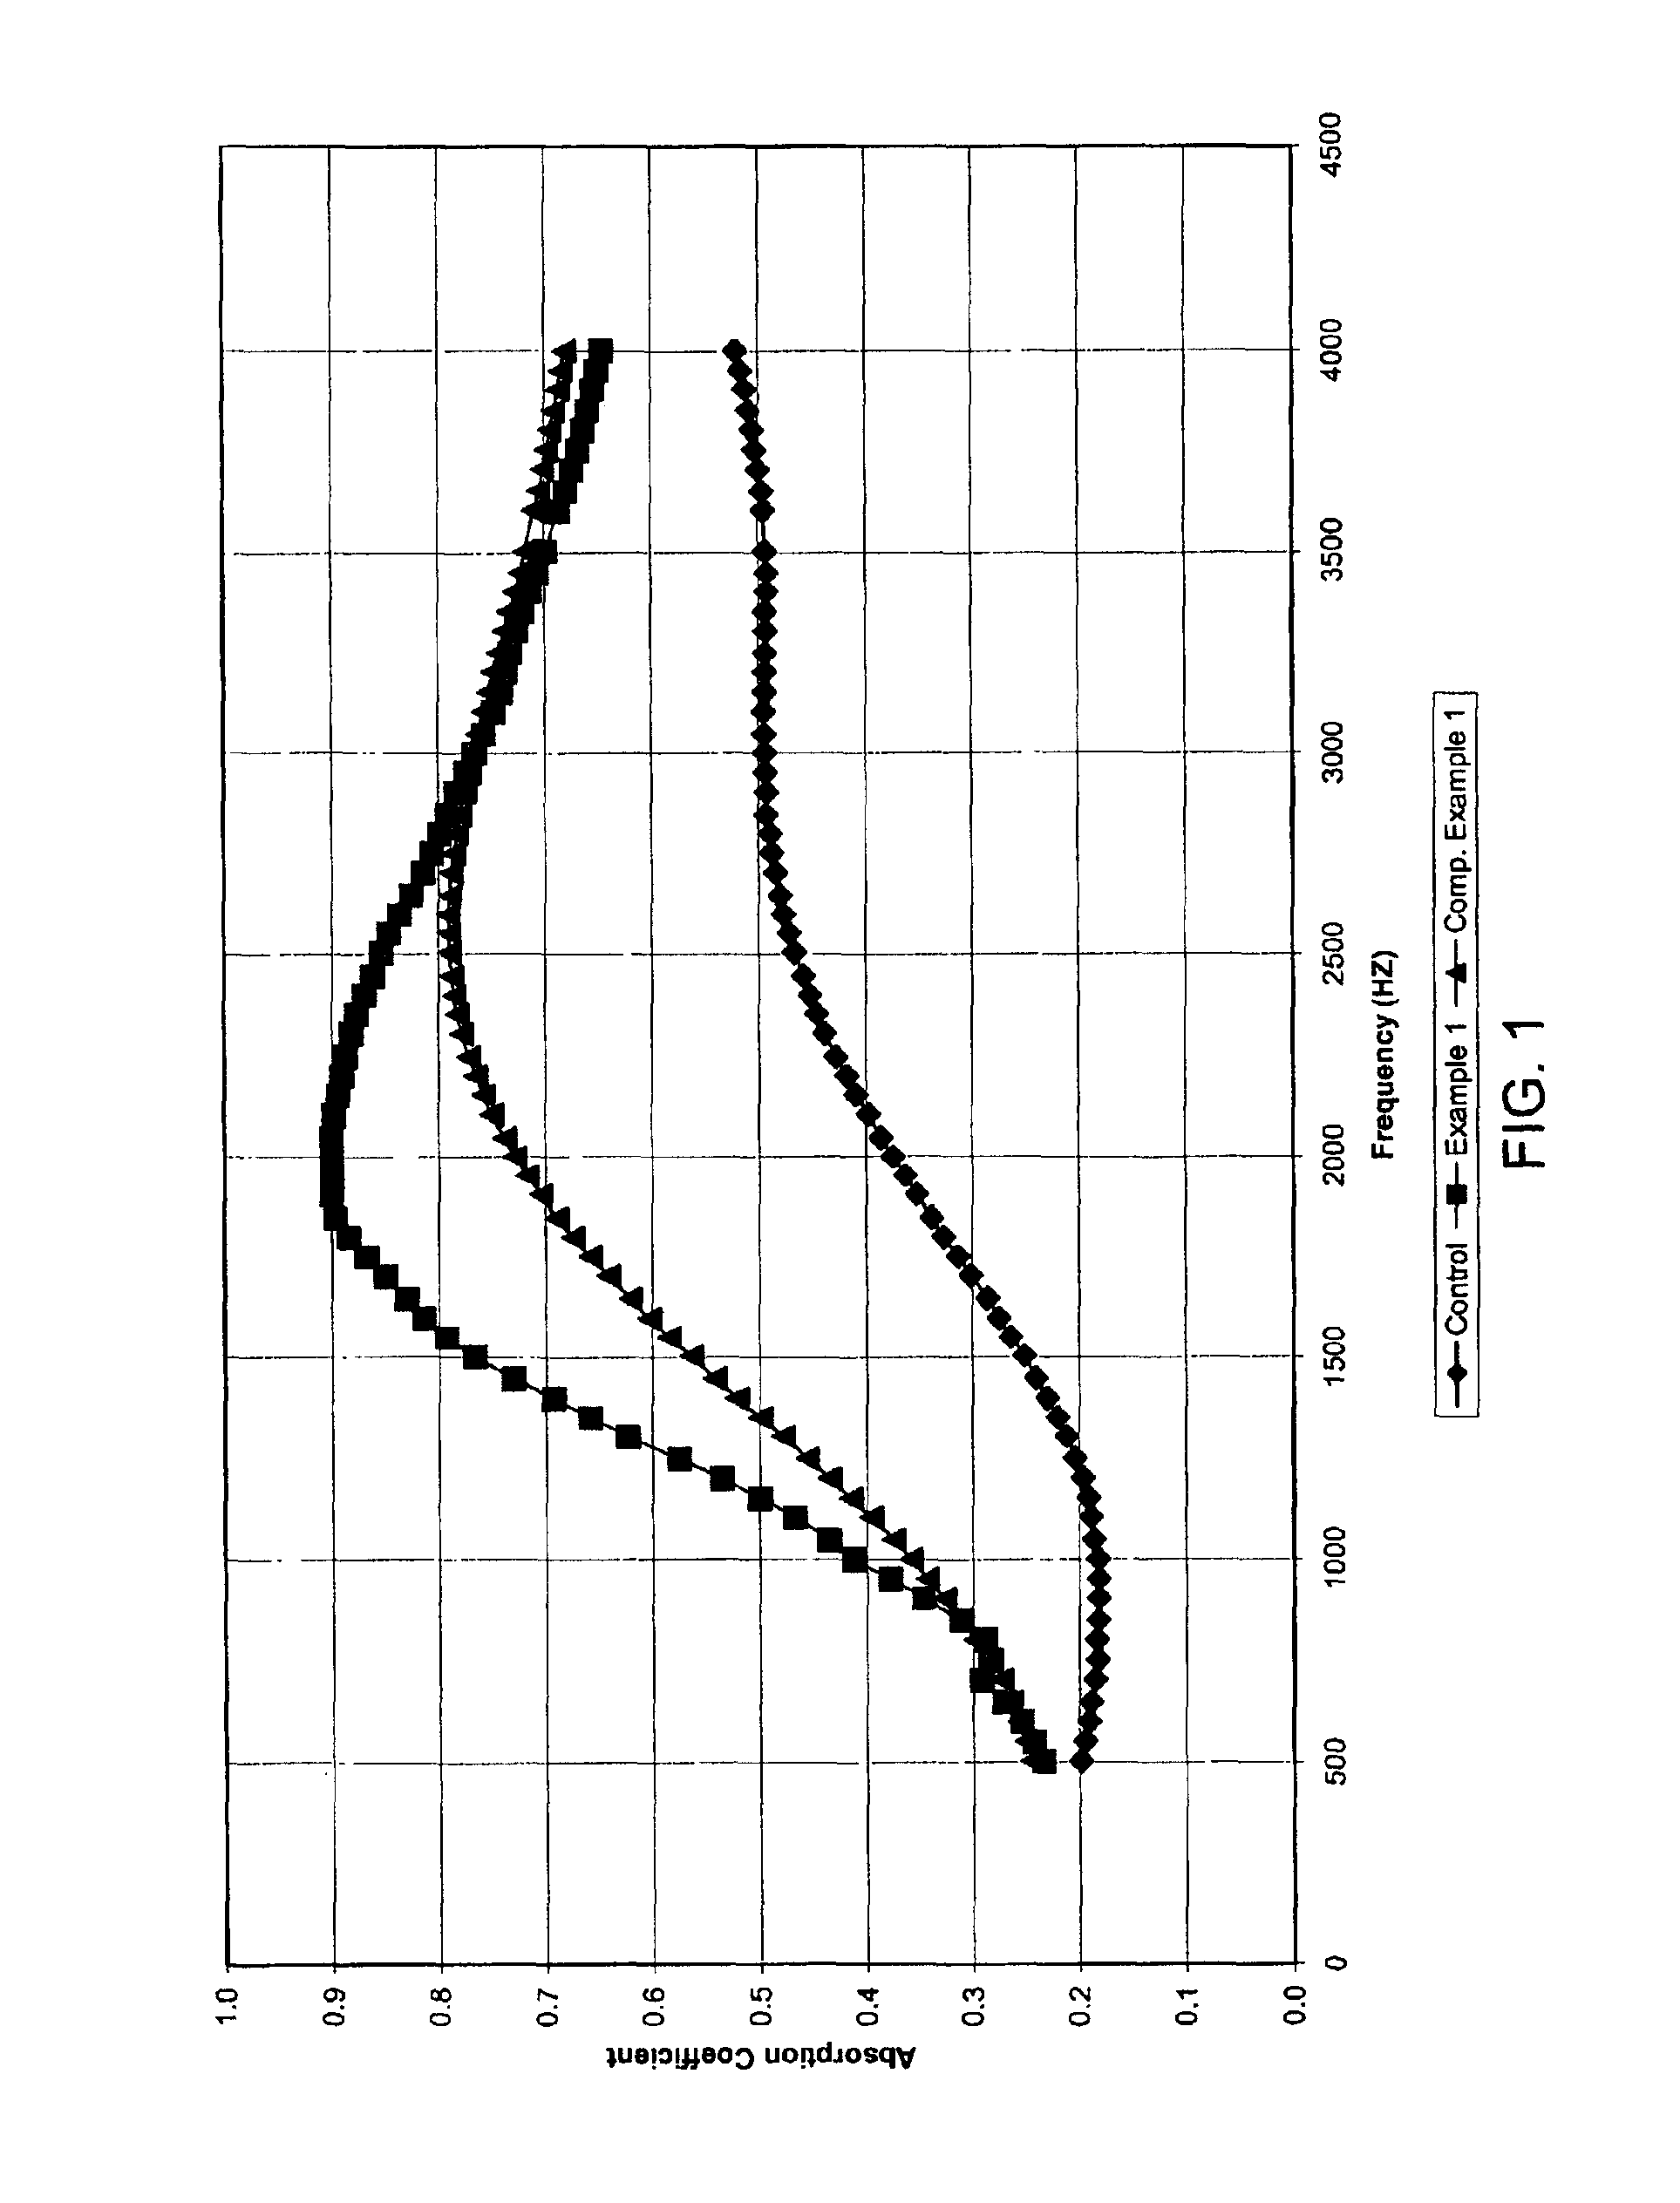 Acoustical insulation material containing fine thermoplastic fibers